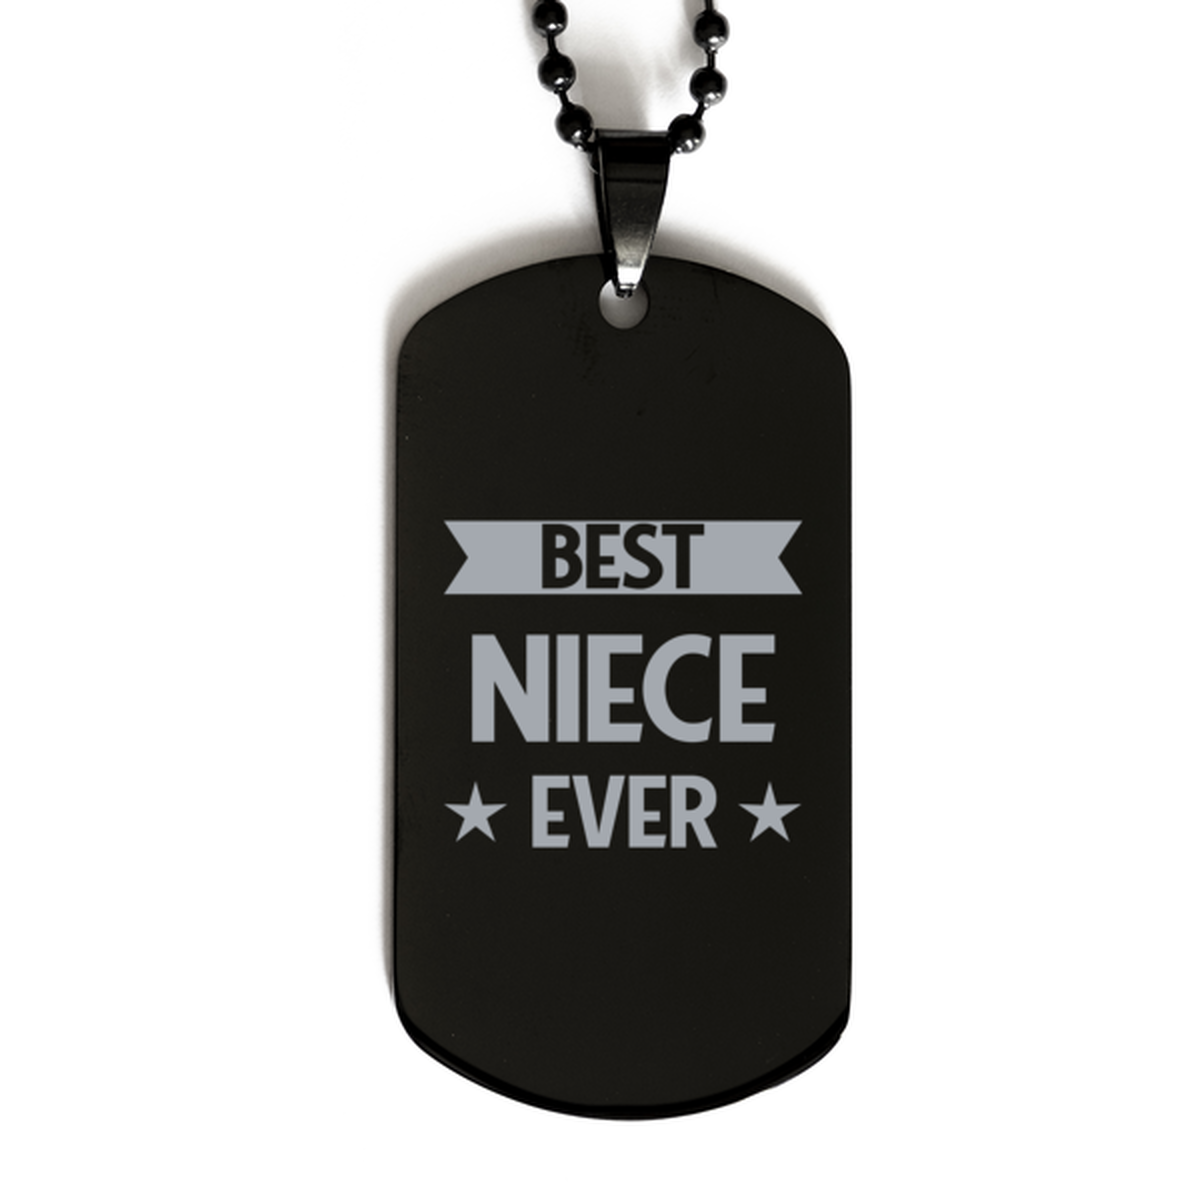 Best Niece Ever Niece Gifts, Funny Black Dog Tag For Niece, Birthday Family Presents Engraved Necklace For Women